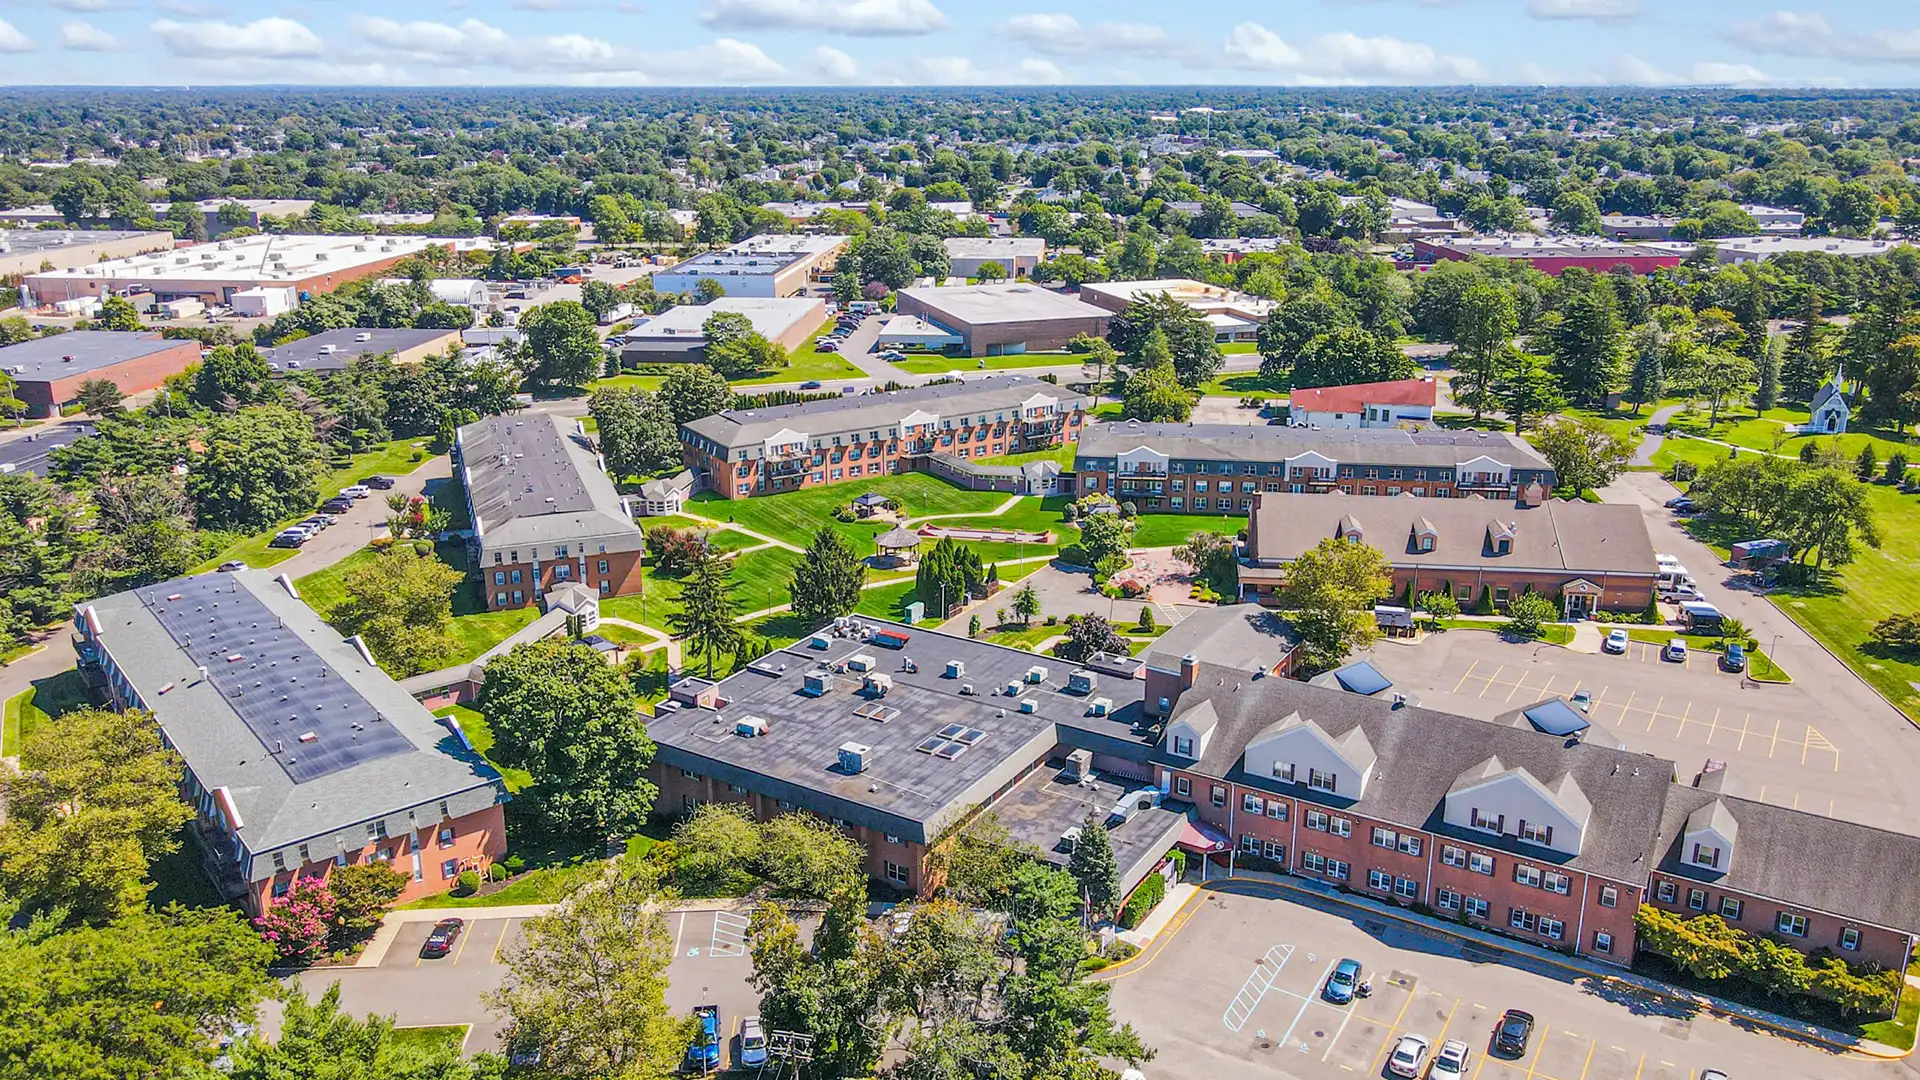 Overhead View of Dominican Village campus.